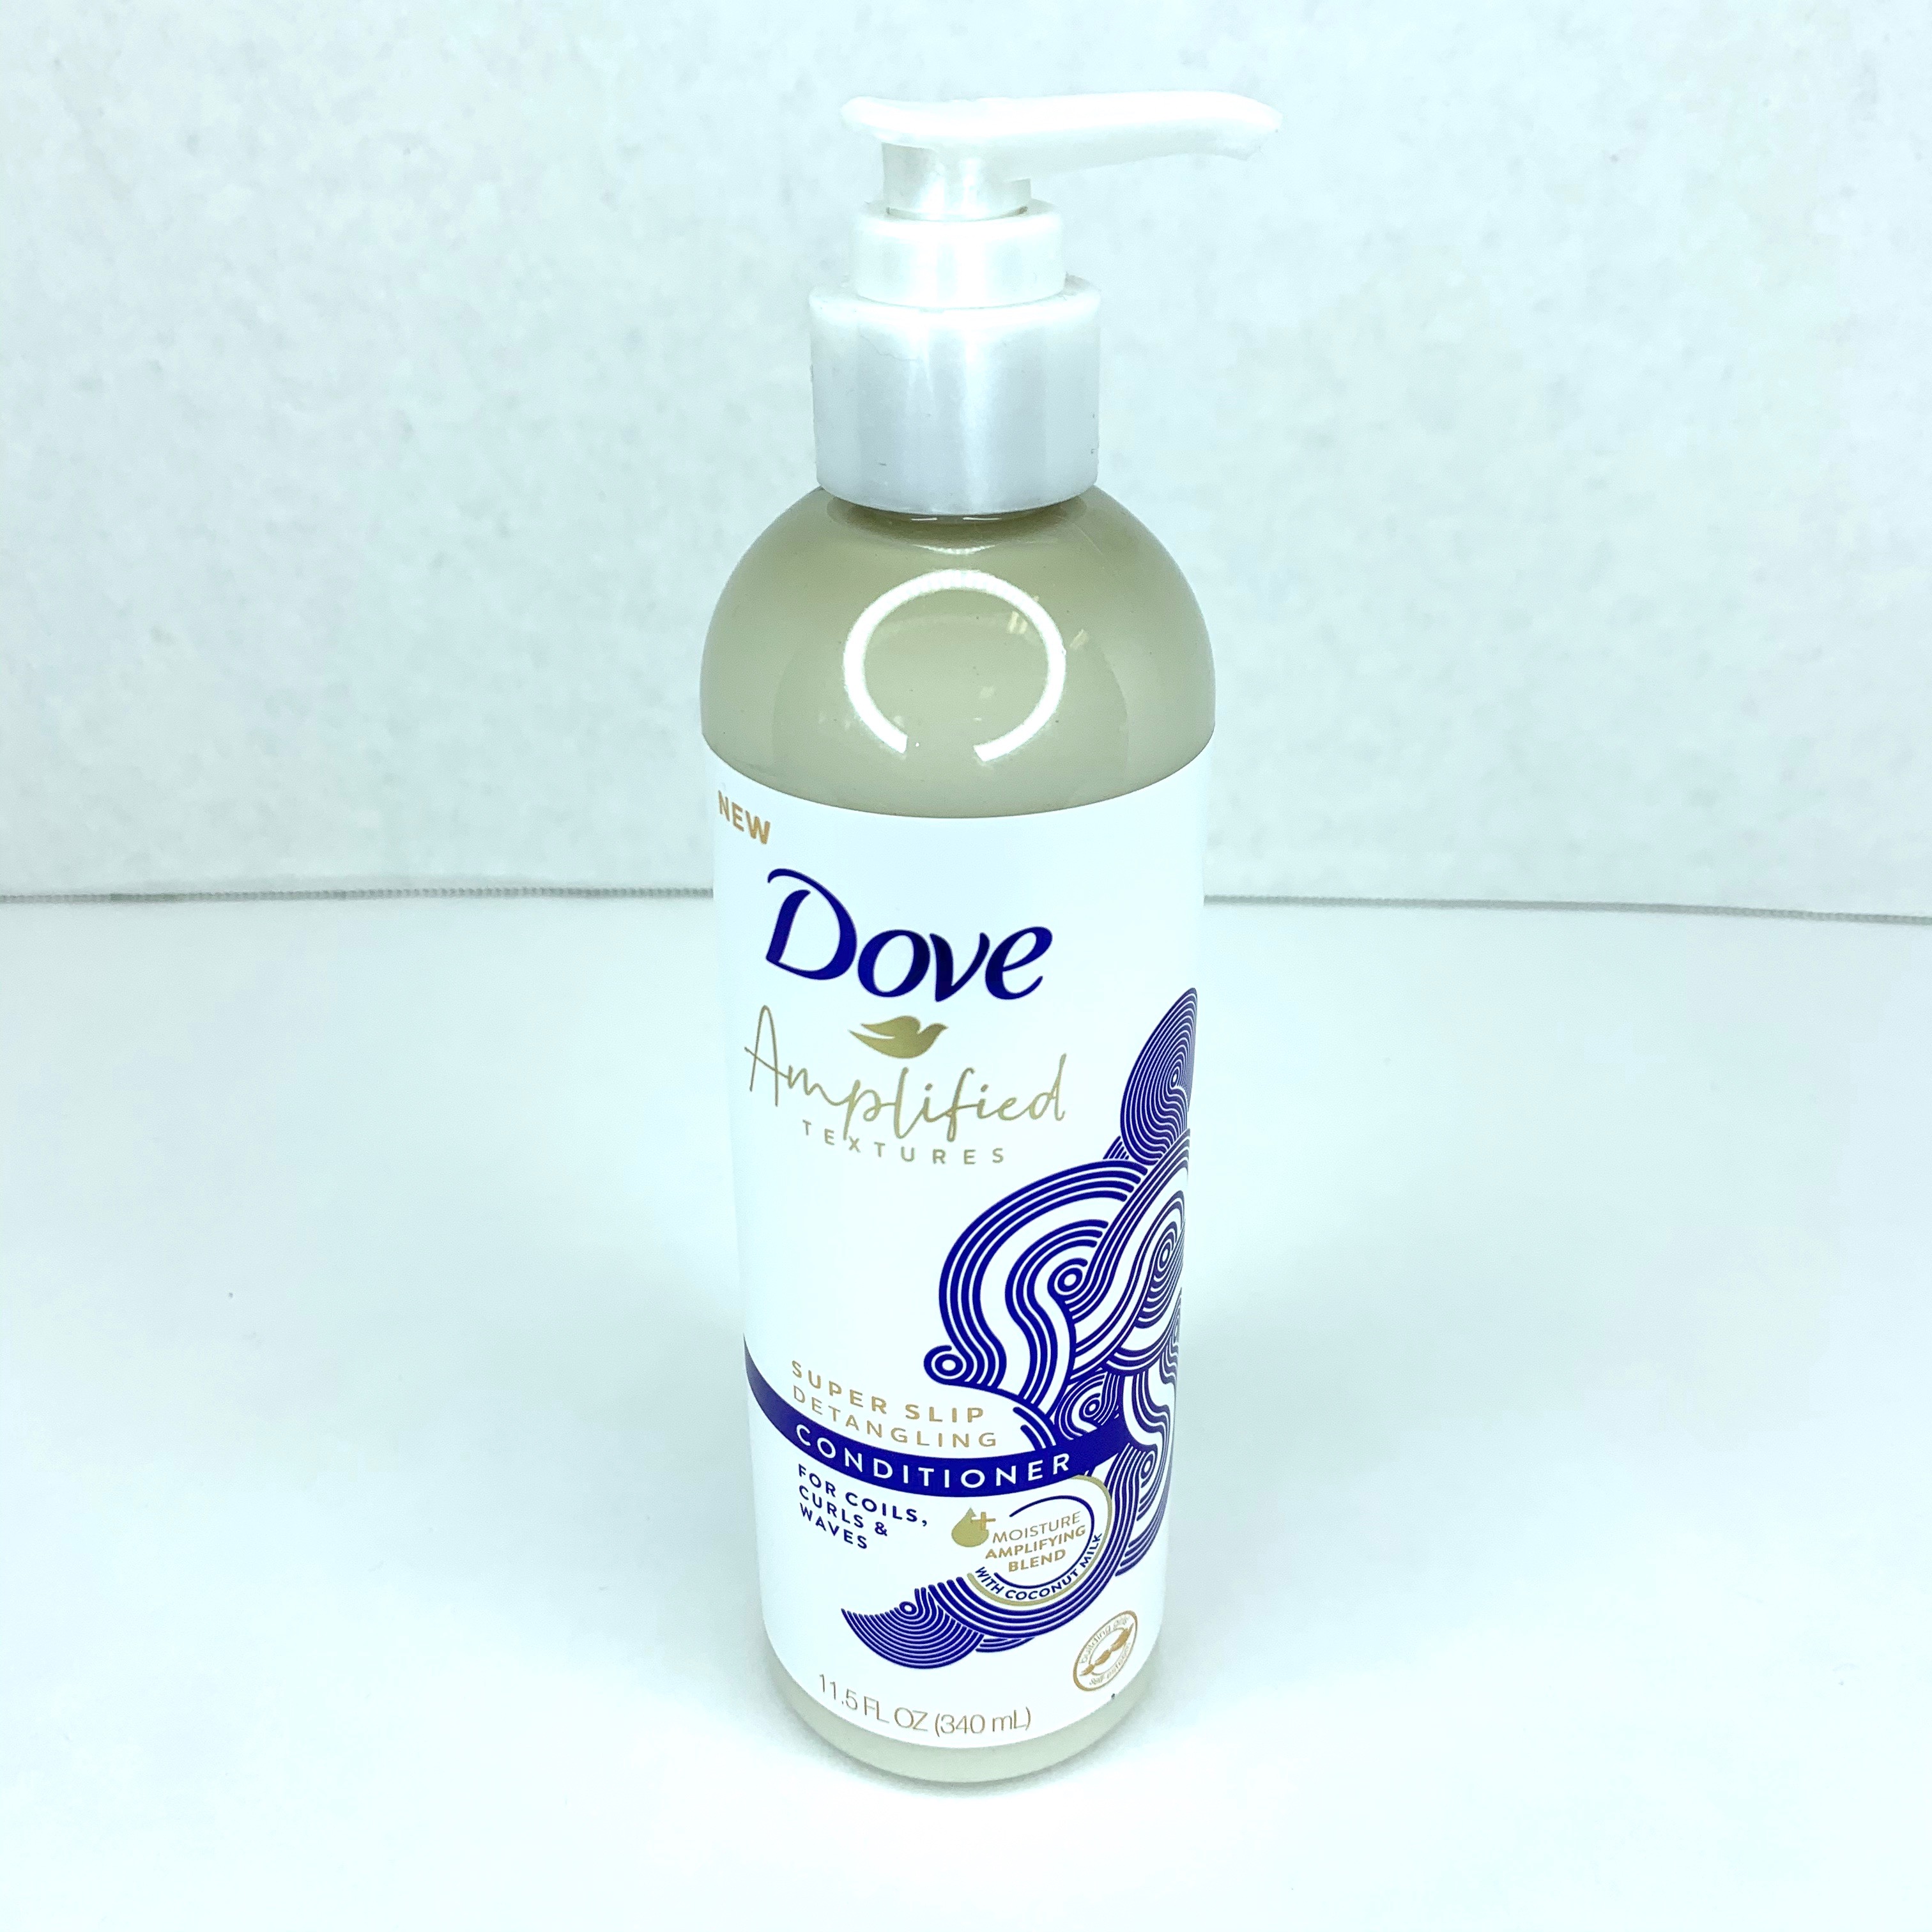 Dove Amplified Textures Super Slip Detangling Conditioner Front for Cocotique May 2020